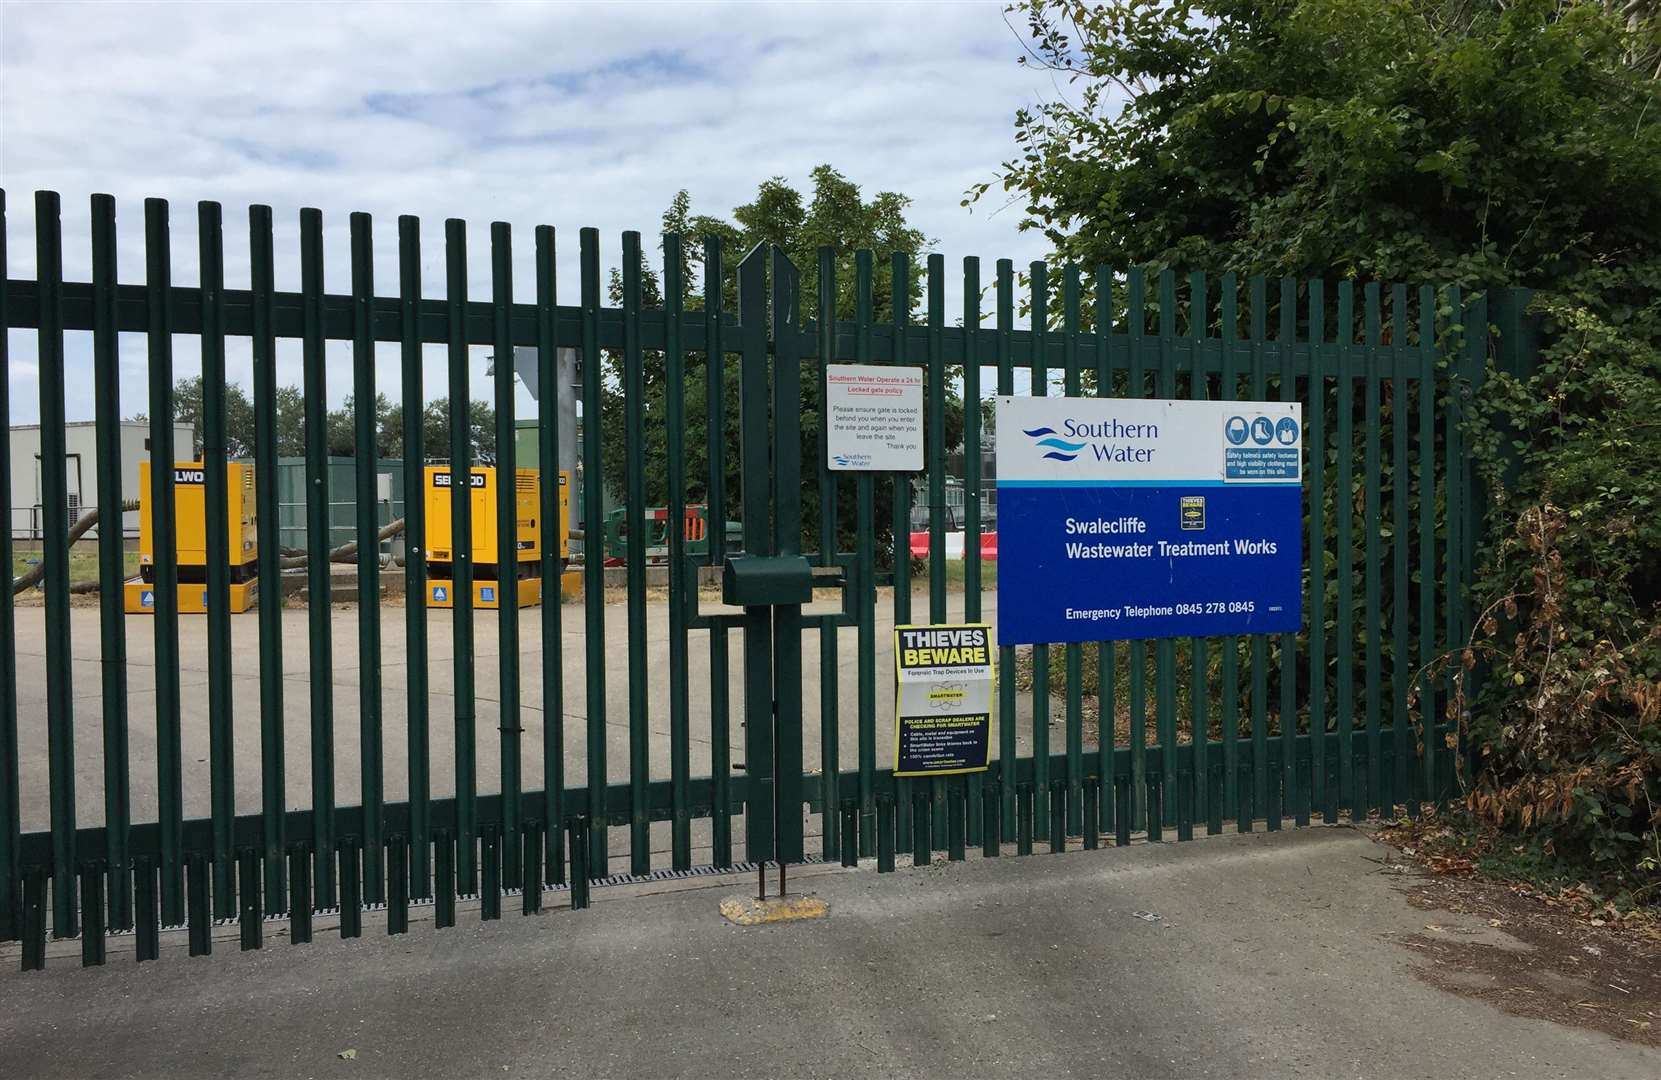 Southern Water's treatment works in Swalecliffe